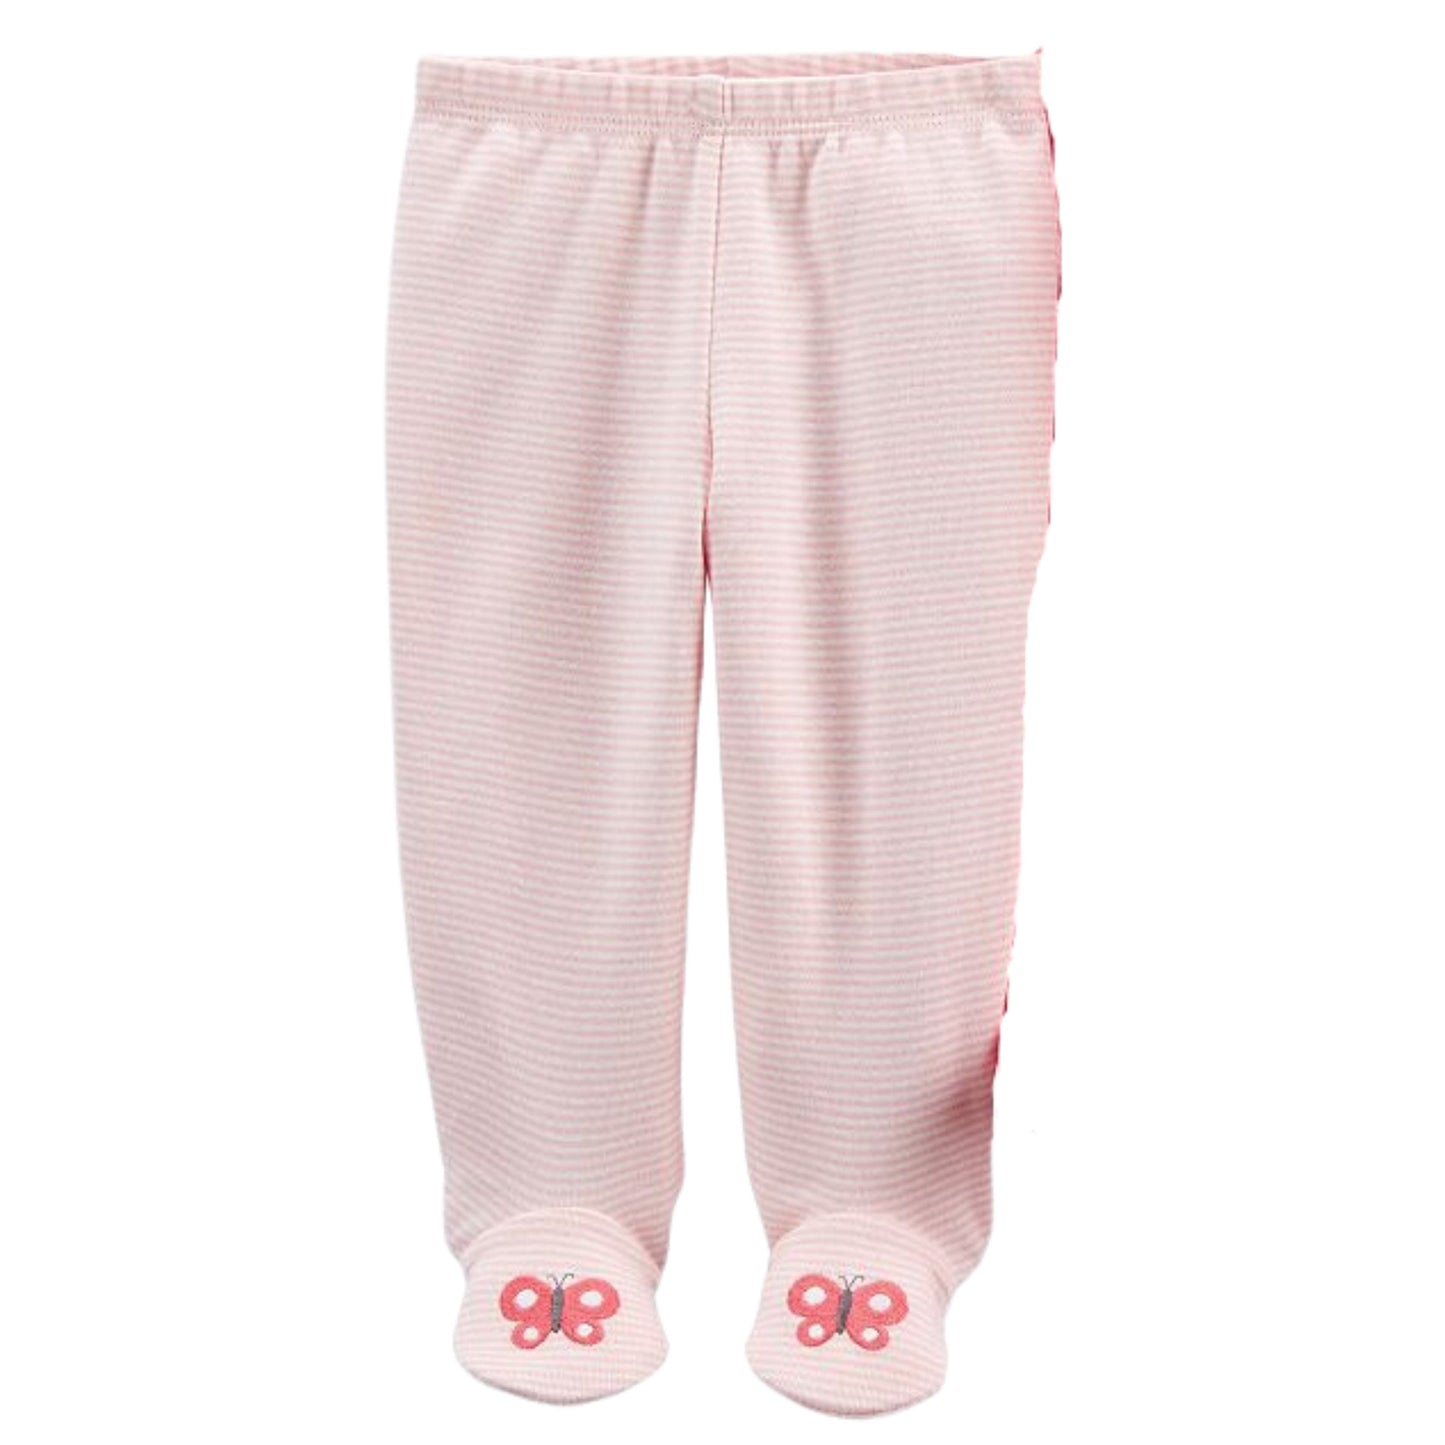 CARTER'S Baby Girl New Born / Pink CARTER'S - BABY -  Cotton Footed Pants